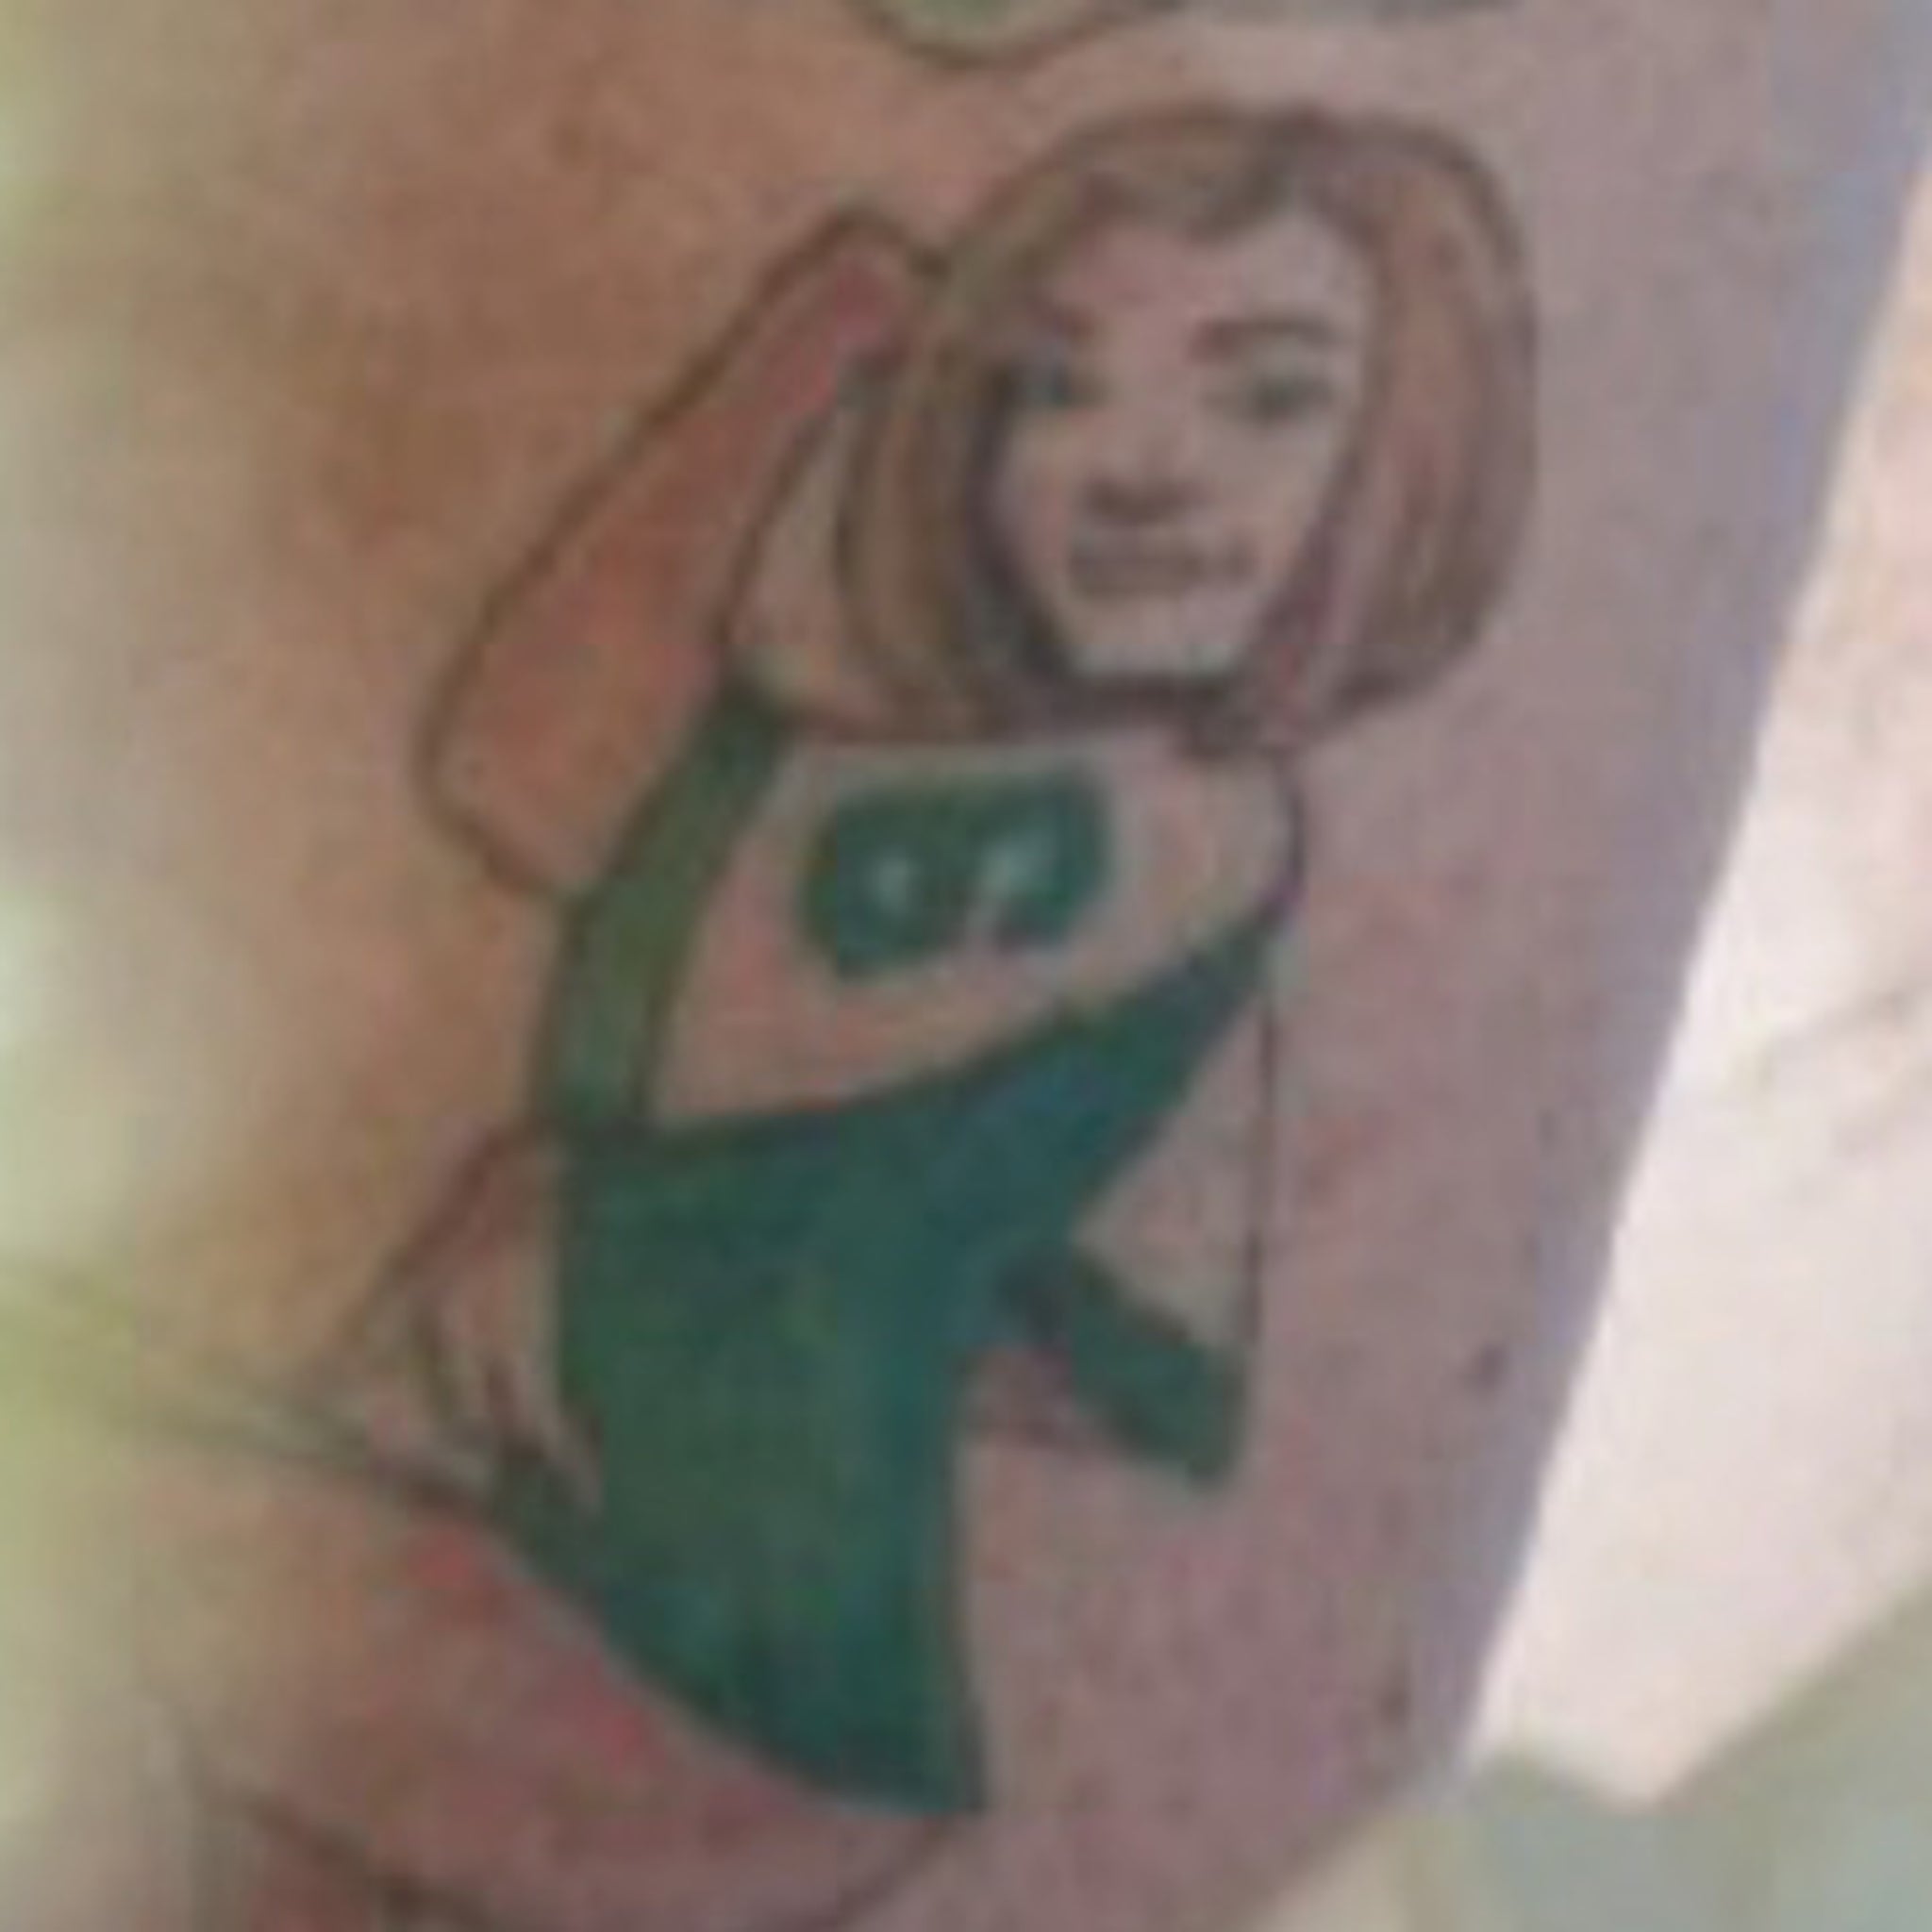 Rex Ryan Has A Tattoo Of His Wife In a Mark Sanchez Jersey